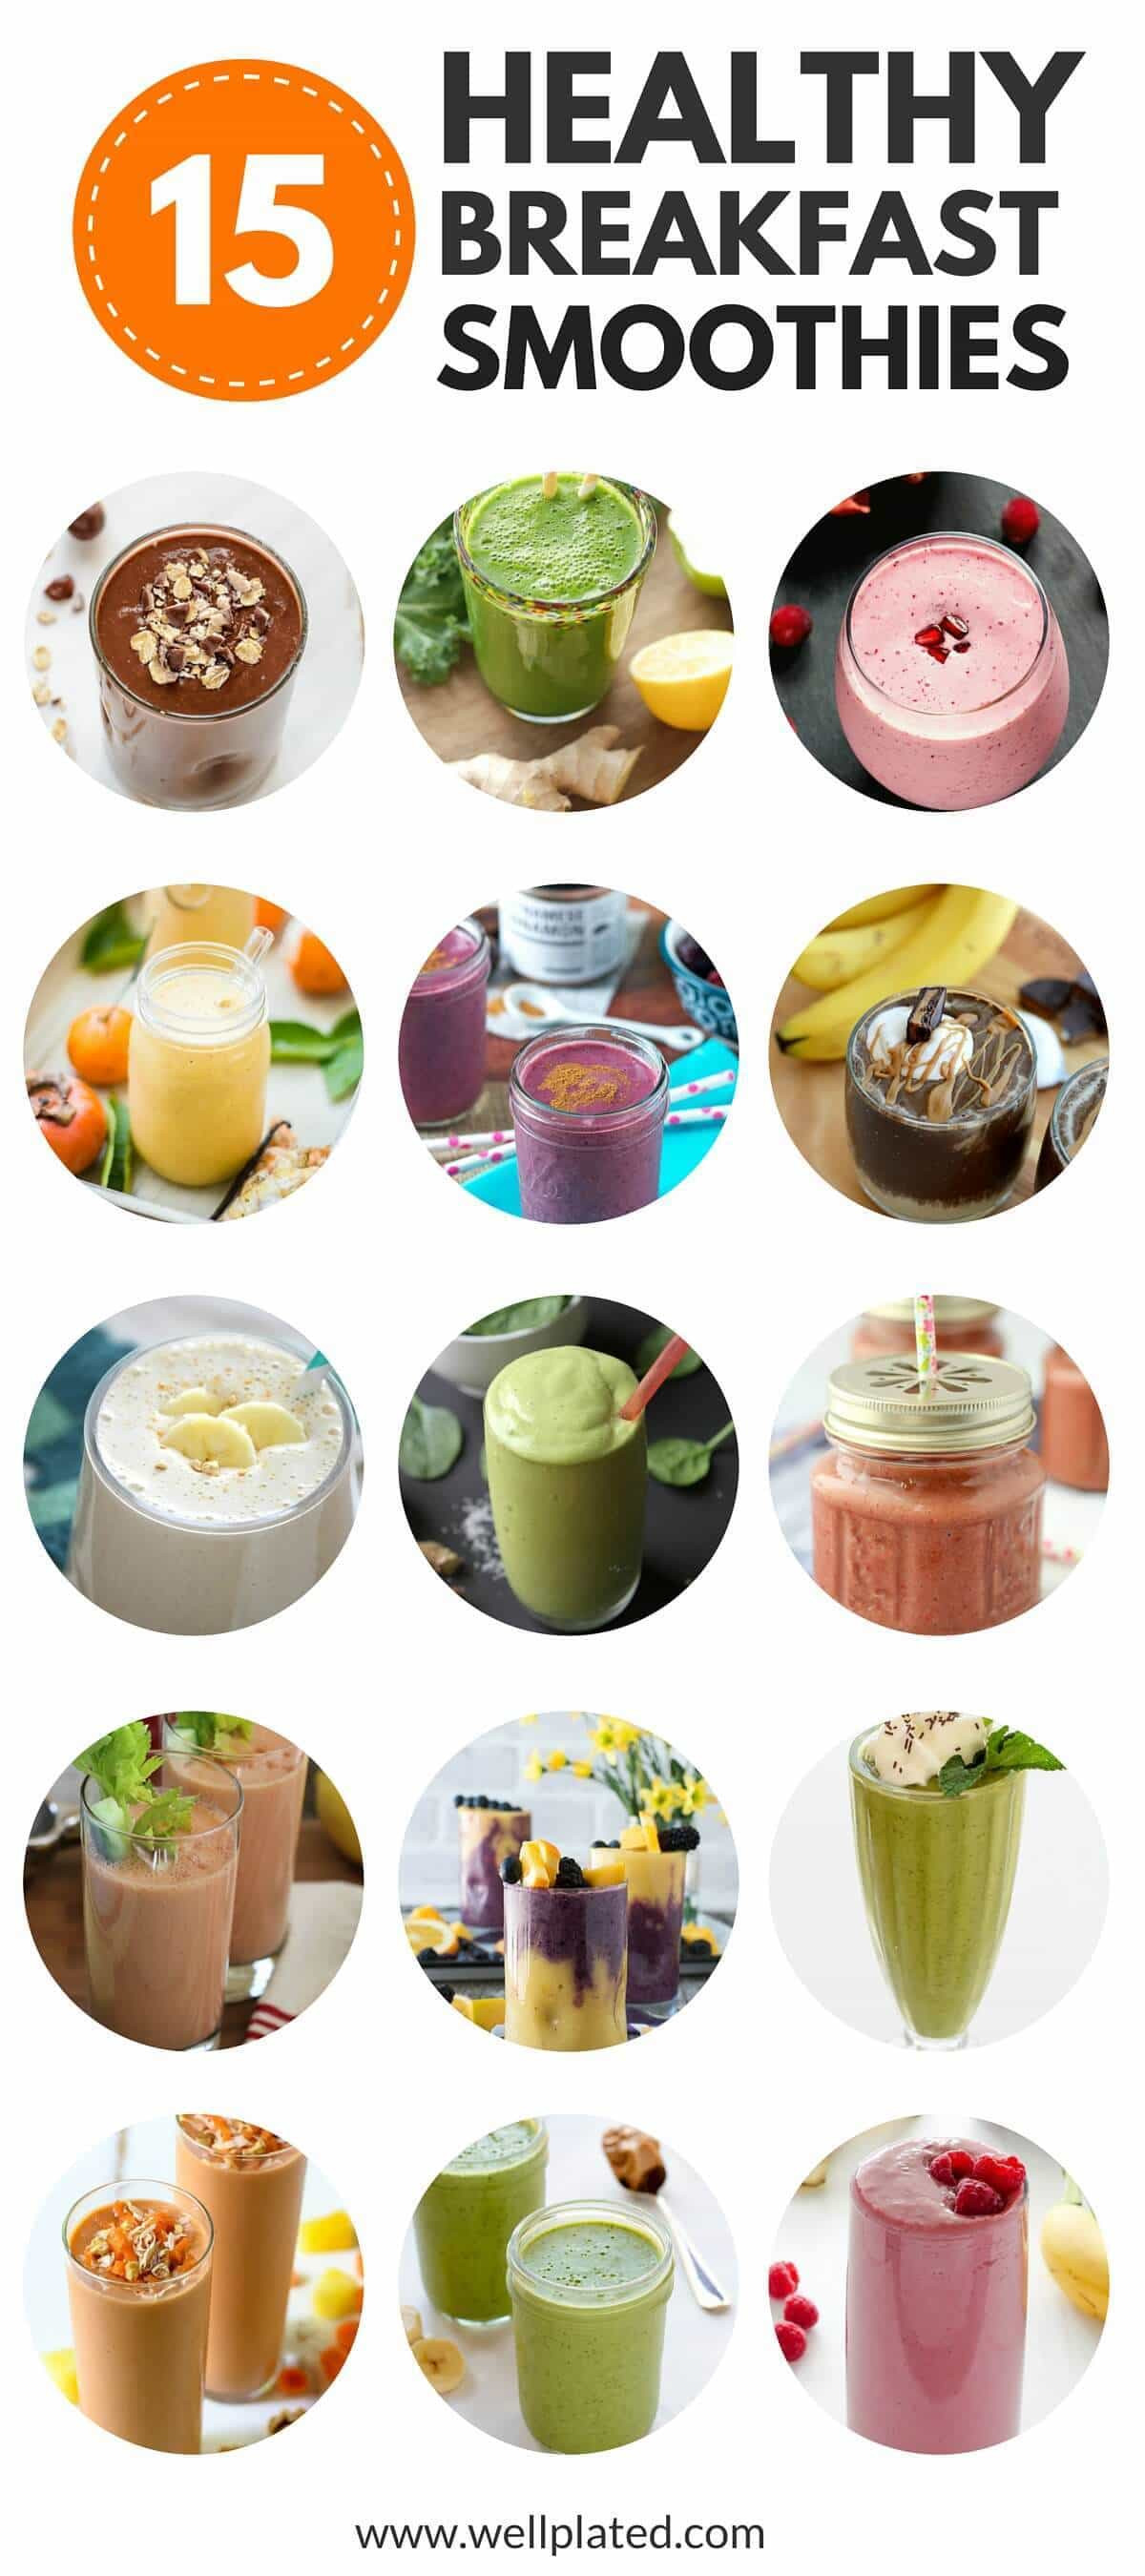 Healthy Breakfast Ideas For Weight Loss
 The Best 15 Healthy Breakfast Smoothies